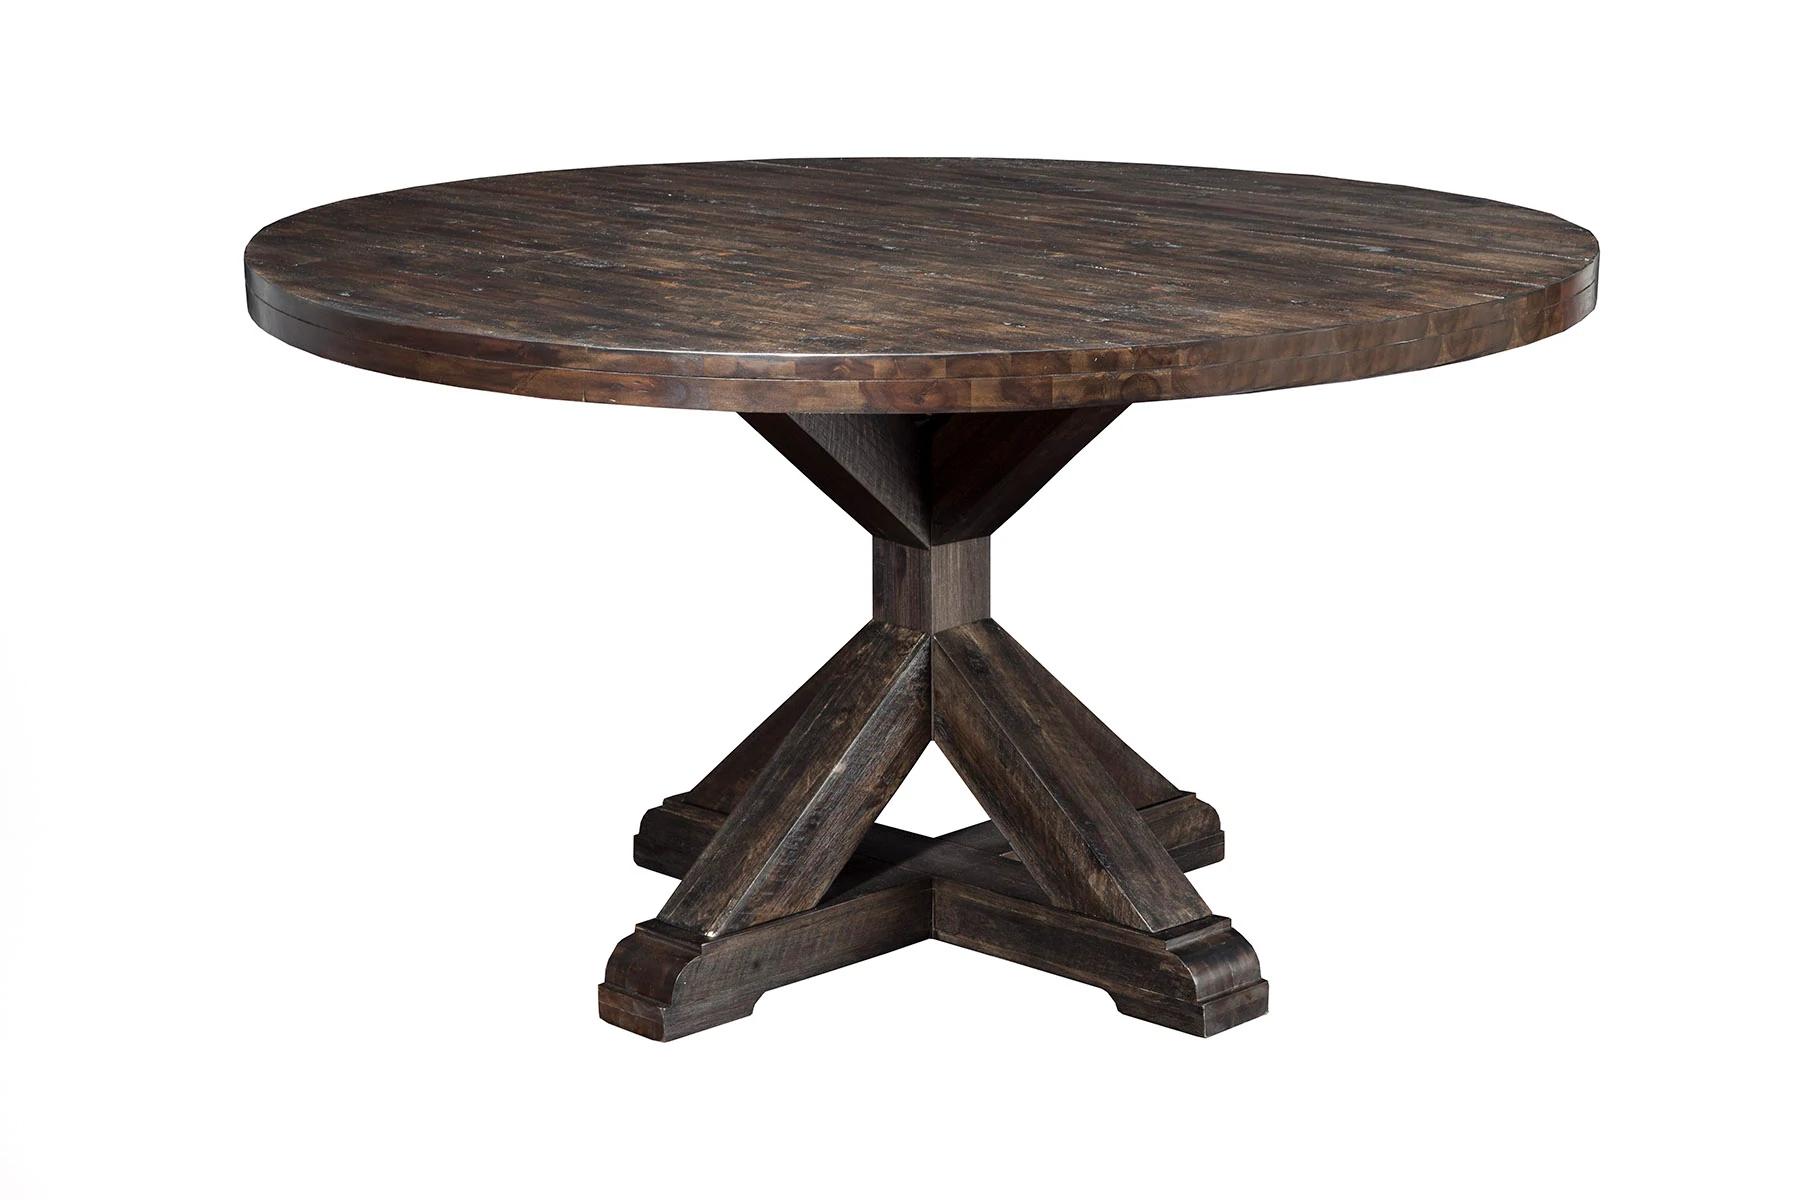 

    
Salvaged Grey Round Dining Table Set 6 Pcs NEWBERRY ALPINE Traditional
